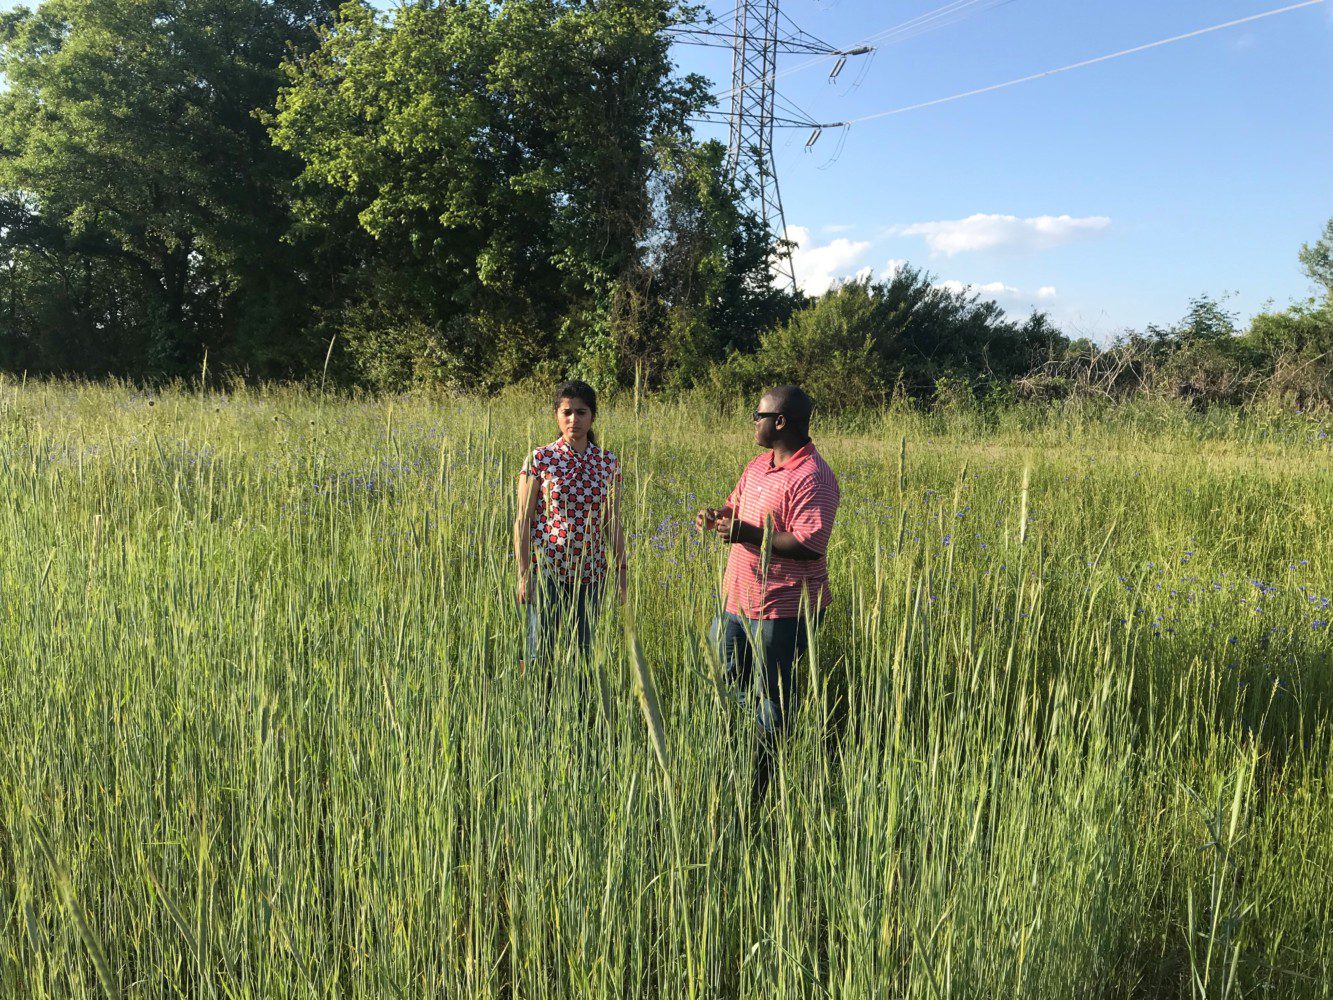 Clemson researchers have found a cover crop mixture that can reduce costs for South Carolina farmers, rejuvenate farm soil and help conserve the state’s water supply if included in crop rotations.